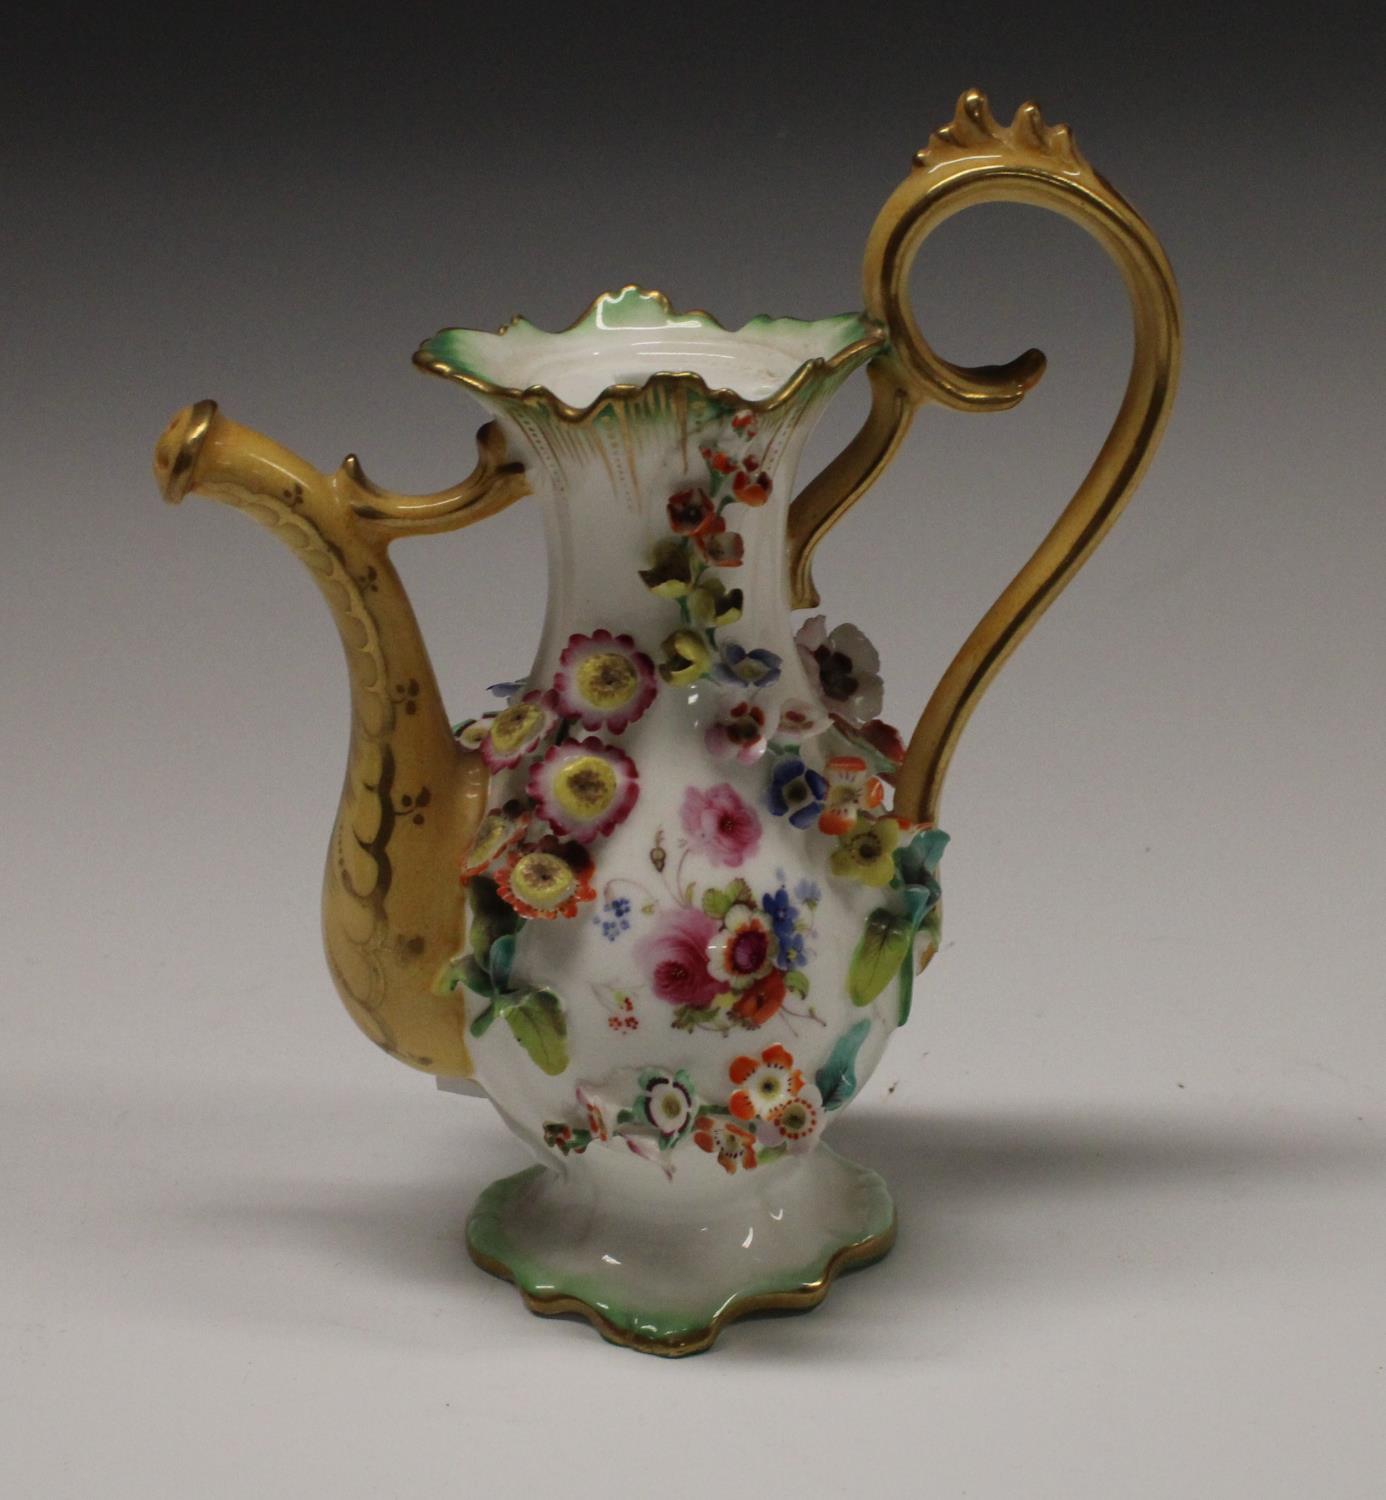 A Rockingham type novelty miniature coffee pot, encrusted with flowers, 16cm high, c.